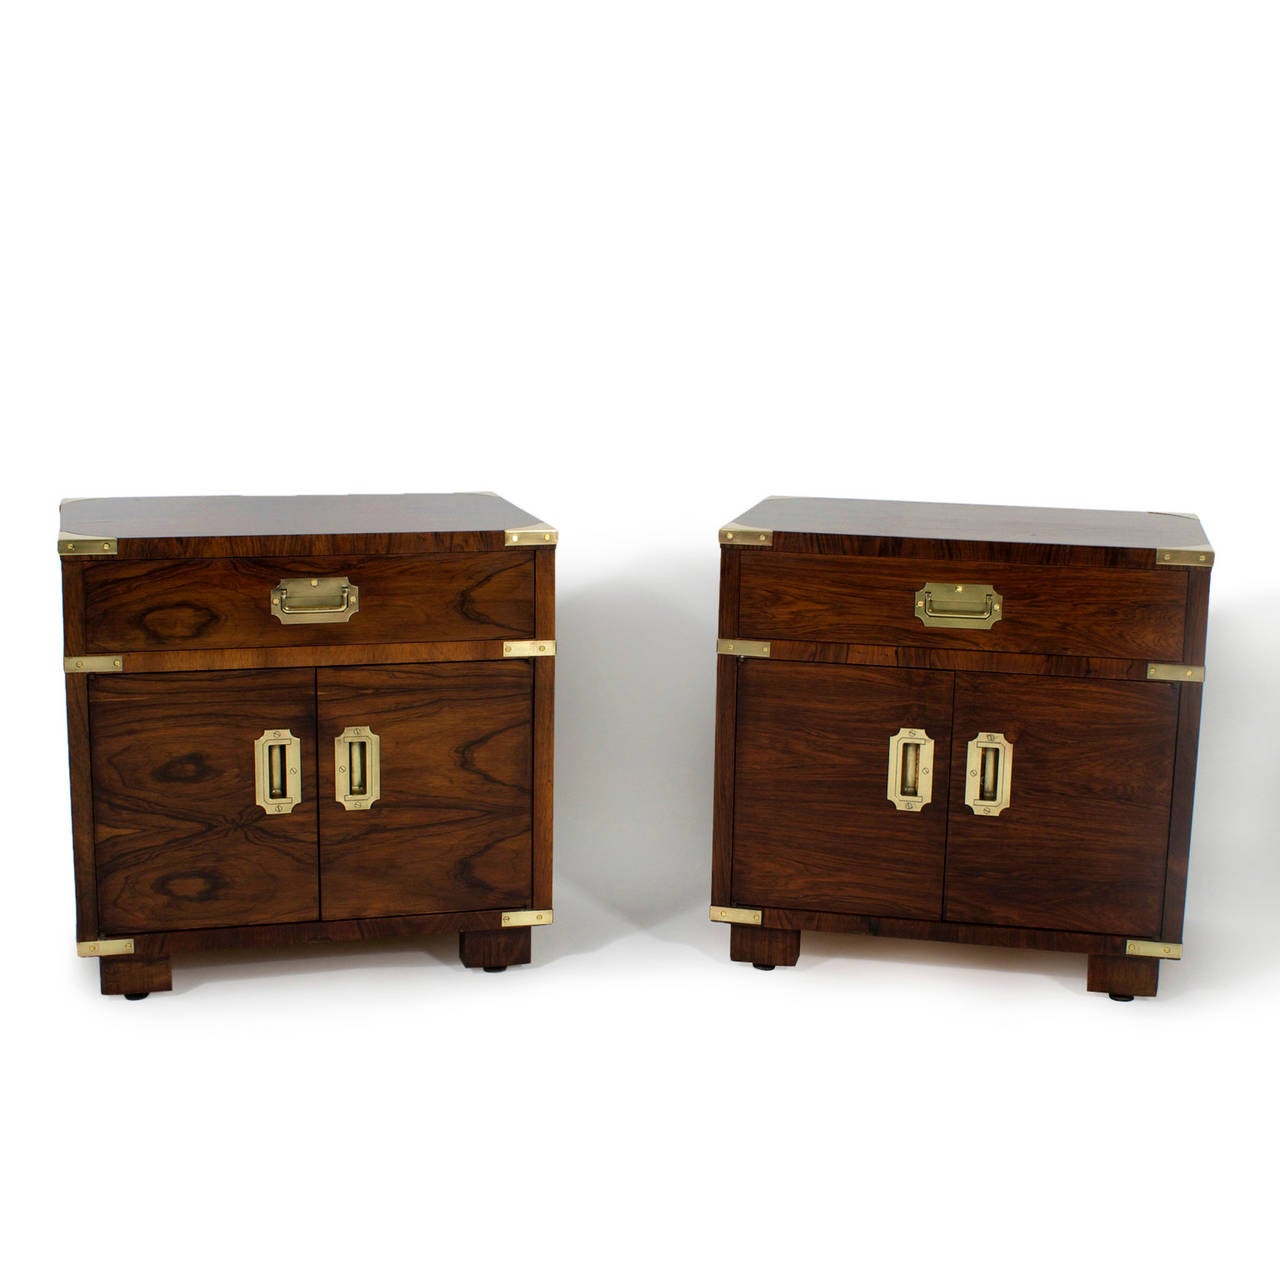 In the mid-20th century, John Stuart designed a line of high quality campaign furniture, with modern flair, based on classic lines and tropical hard woods, This is a pair of labelled nightstands from that line. Rosewood. Newly polished.

 